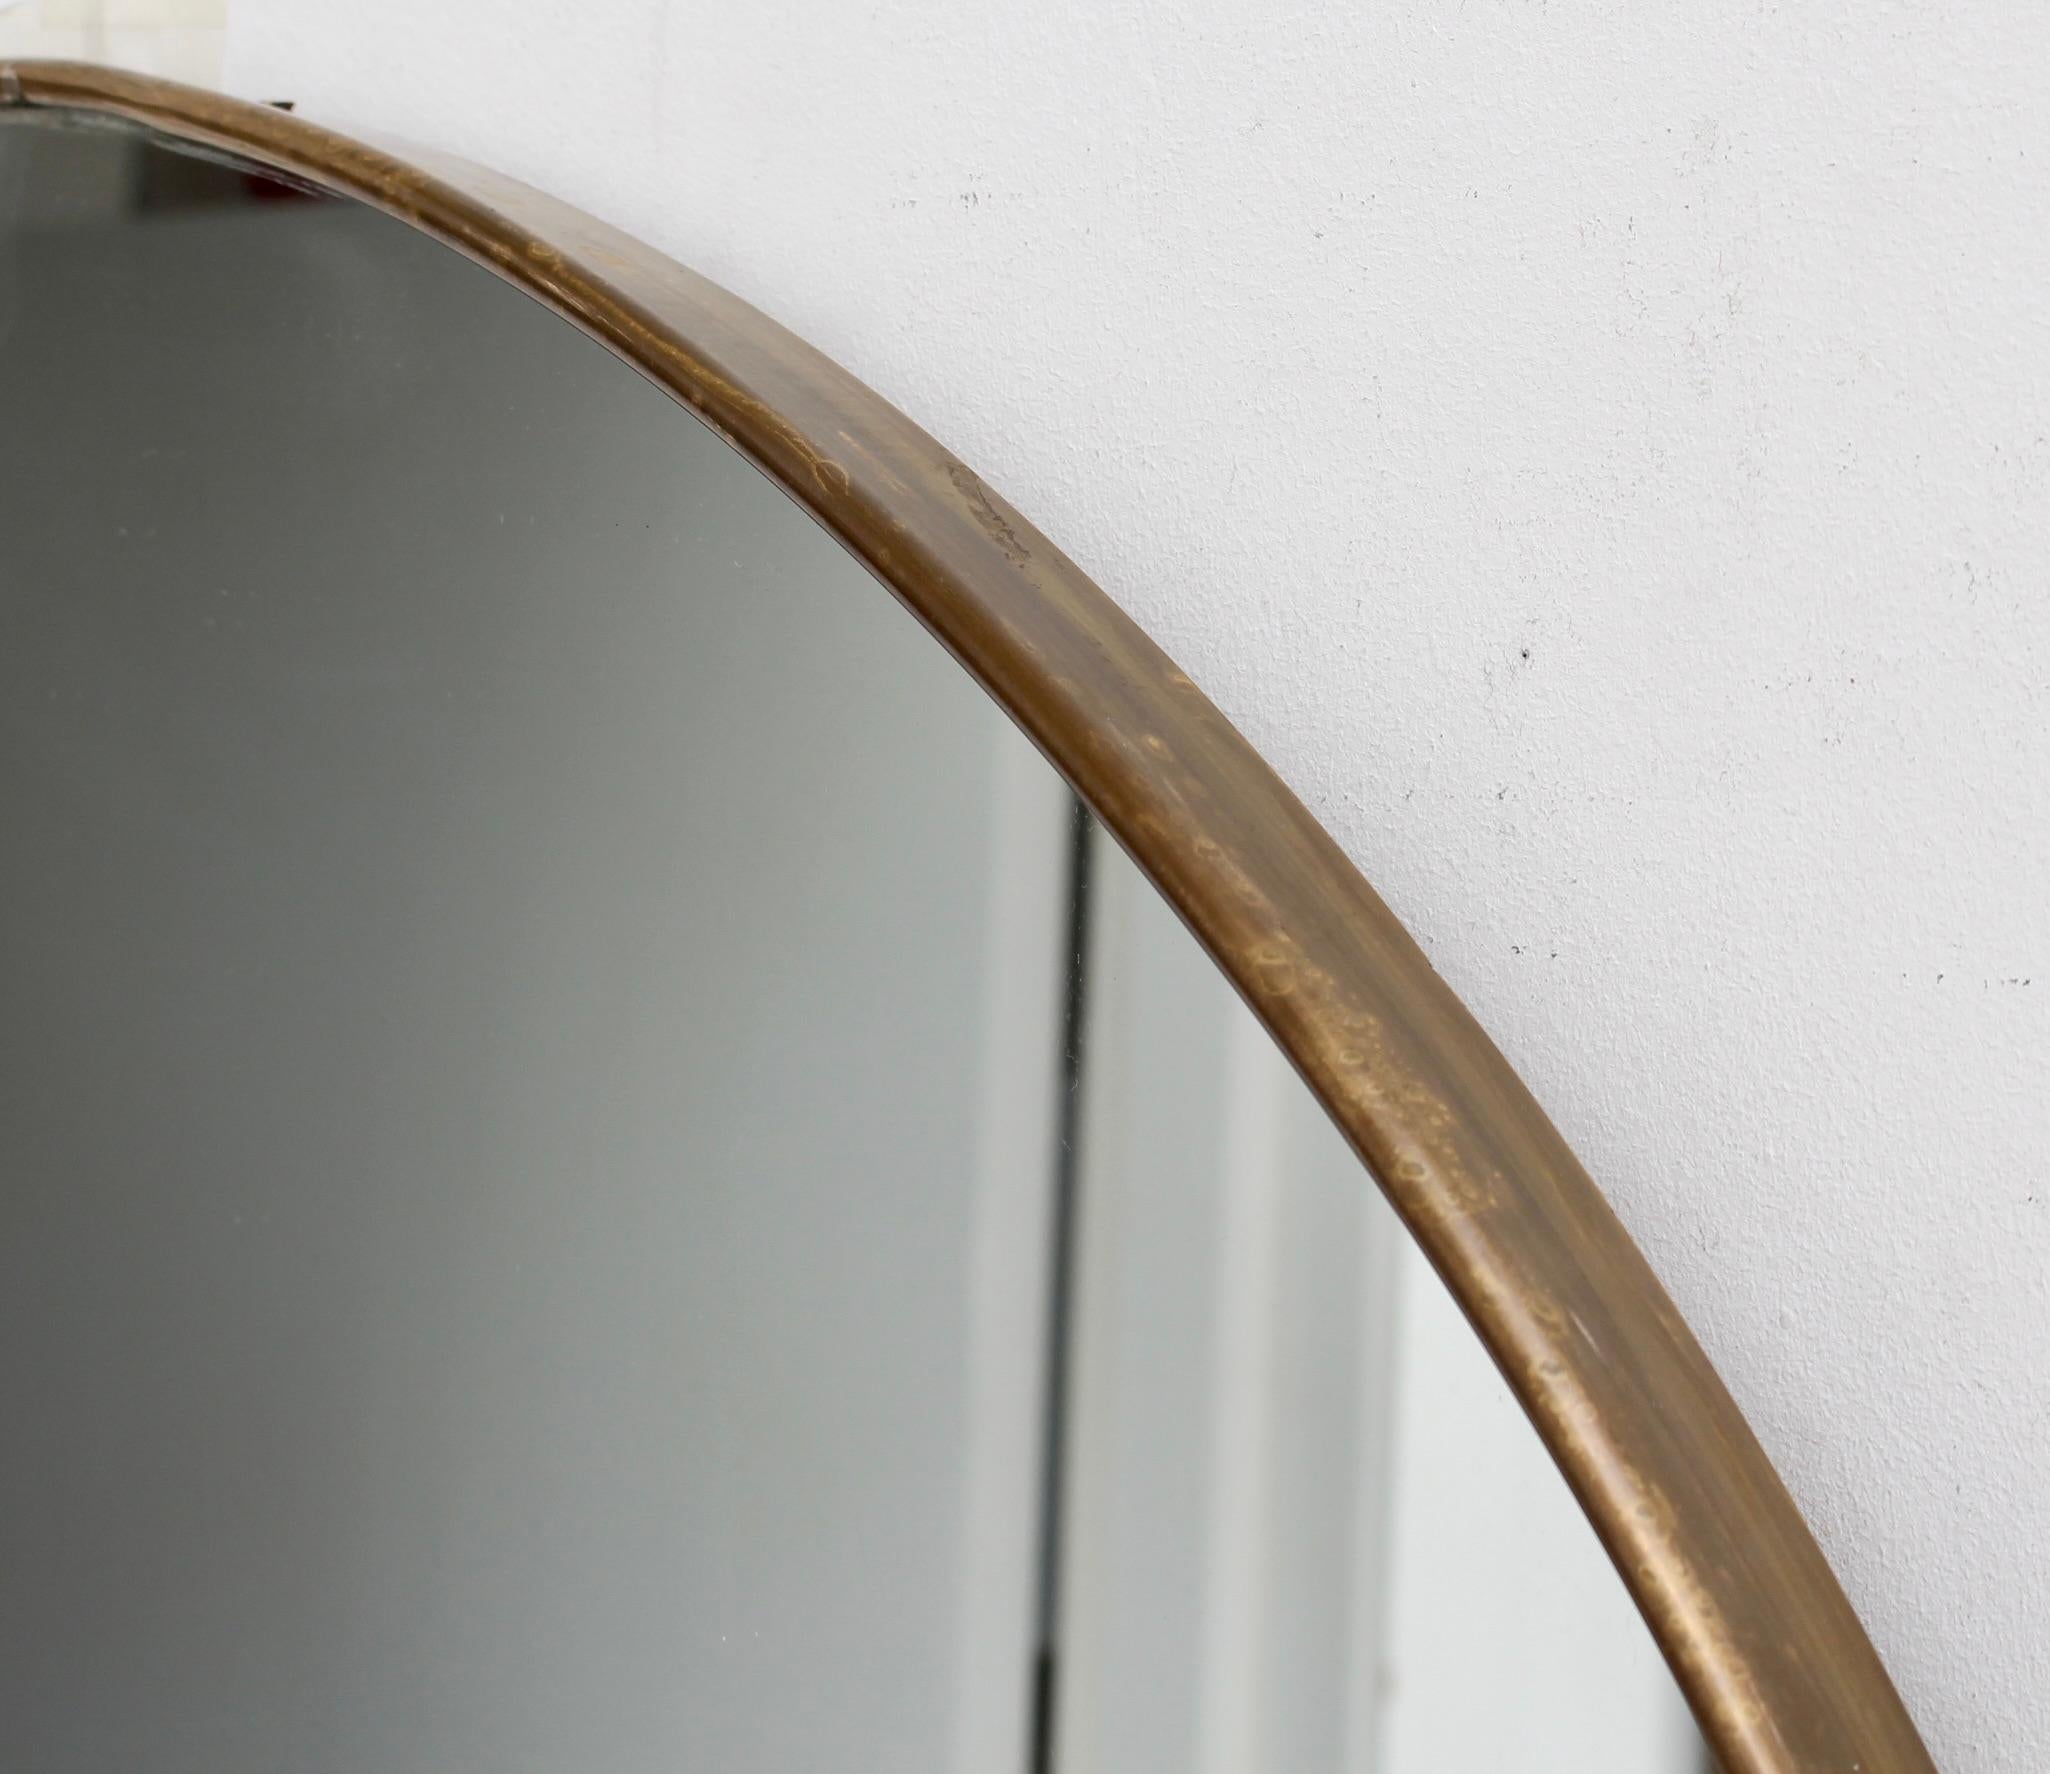 Vintage Italian Round Wall Mirror with Brass Frame (circa 1960s) - Large For Sale 2